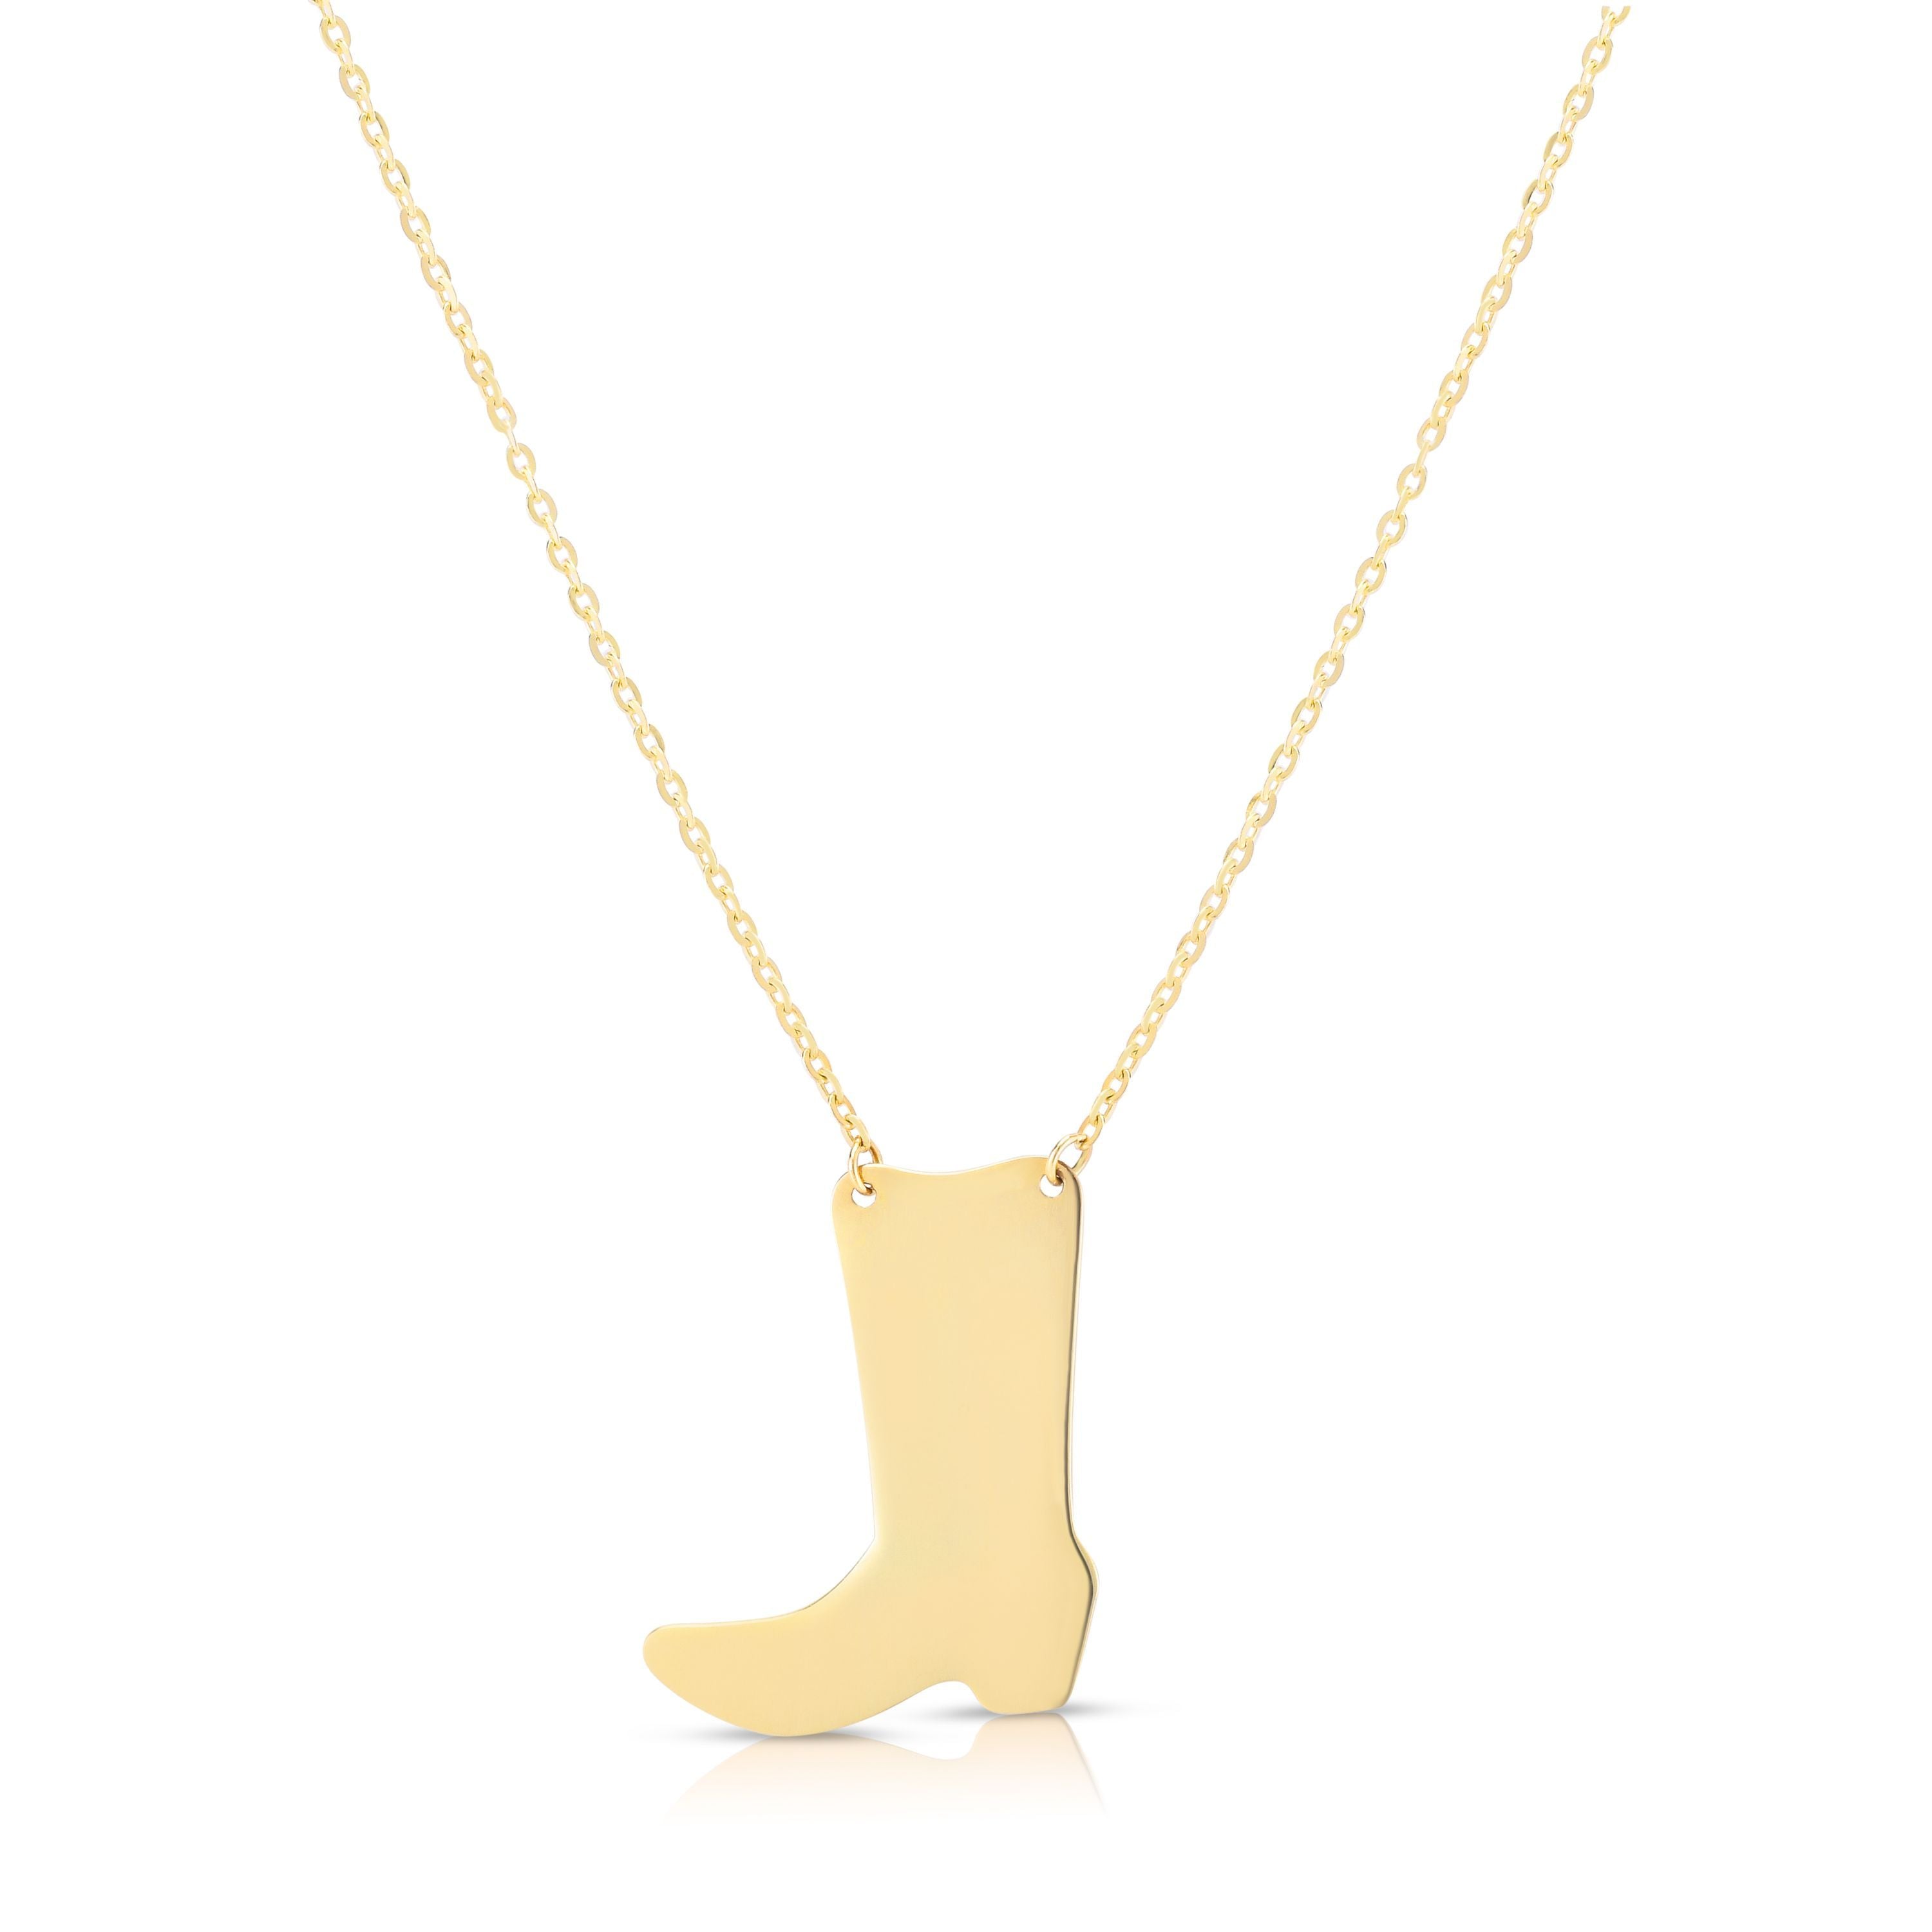 14k Minimalist Yellow Gold Cowboy Boot Stud Earrings, Necklace or Earrings and Necklace Combo